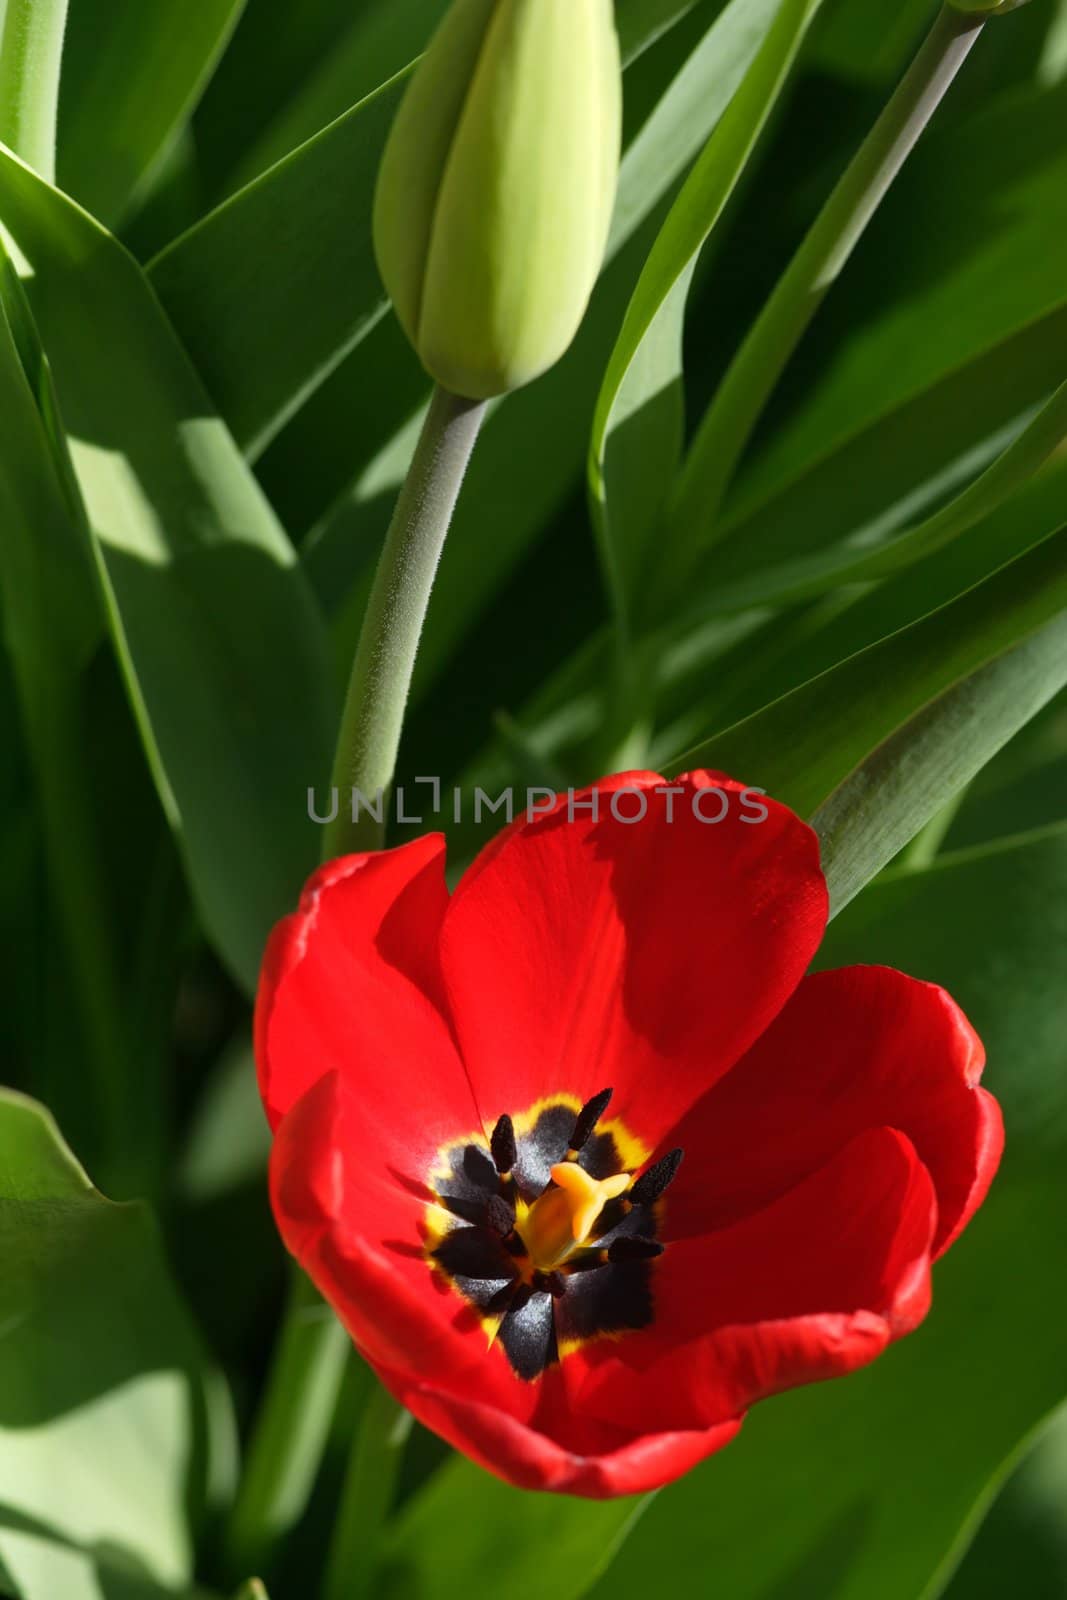 A red tulip in June reaching for the sunlight.
